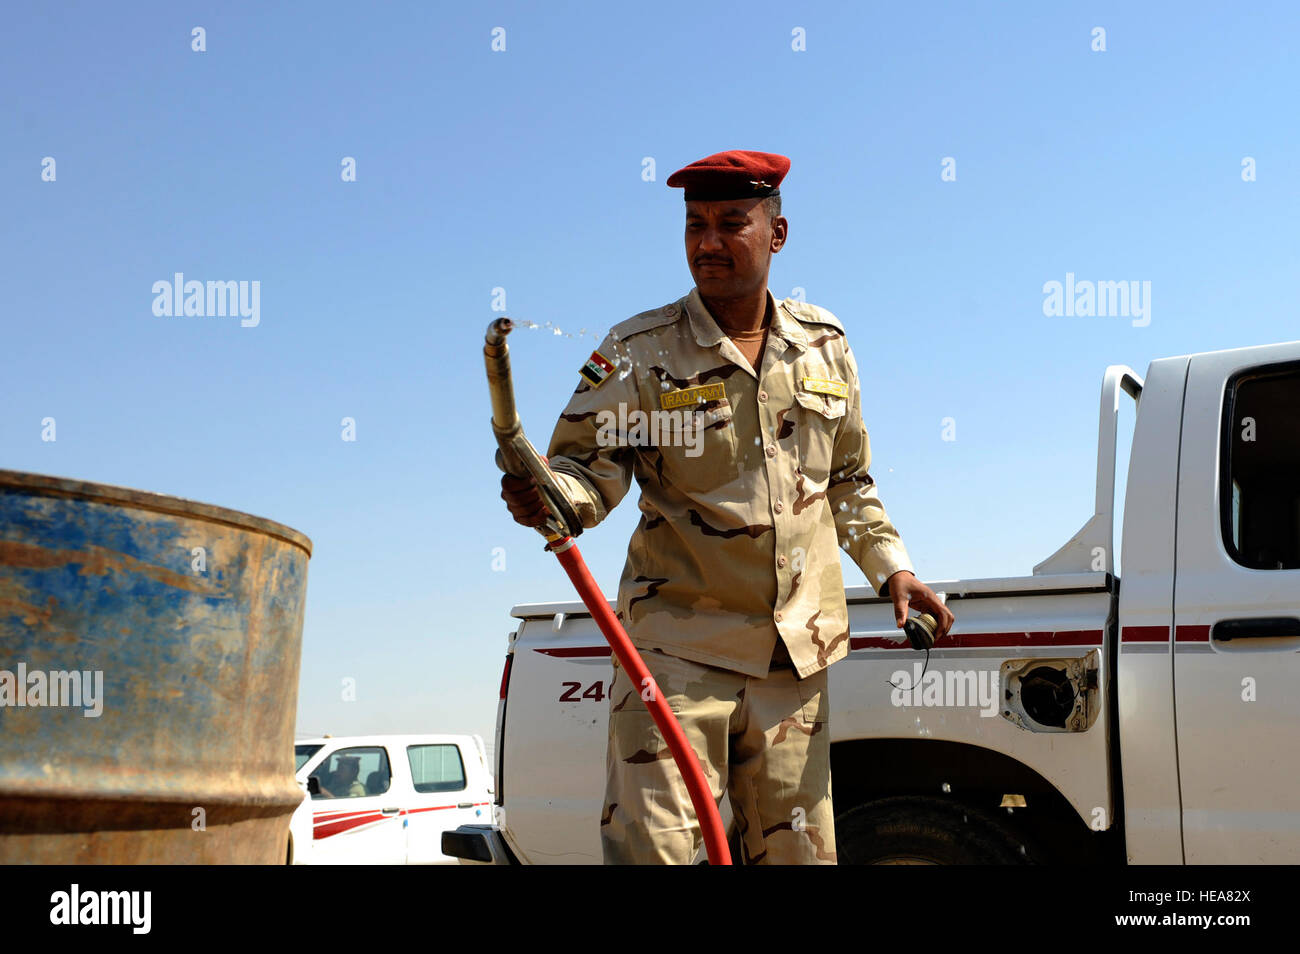 An Iraqi soldier finishes refueling a vehicle at Camp Taji, near Baghdad, Iraq, July 11. The Iraqi fuels depot is run exclusively by the Iraqi army with some assistance from an American Airman assigned to the Logistics Military Advisor Team. Stock Photo